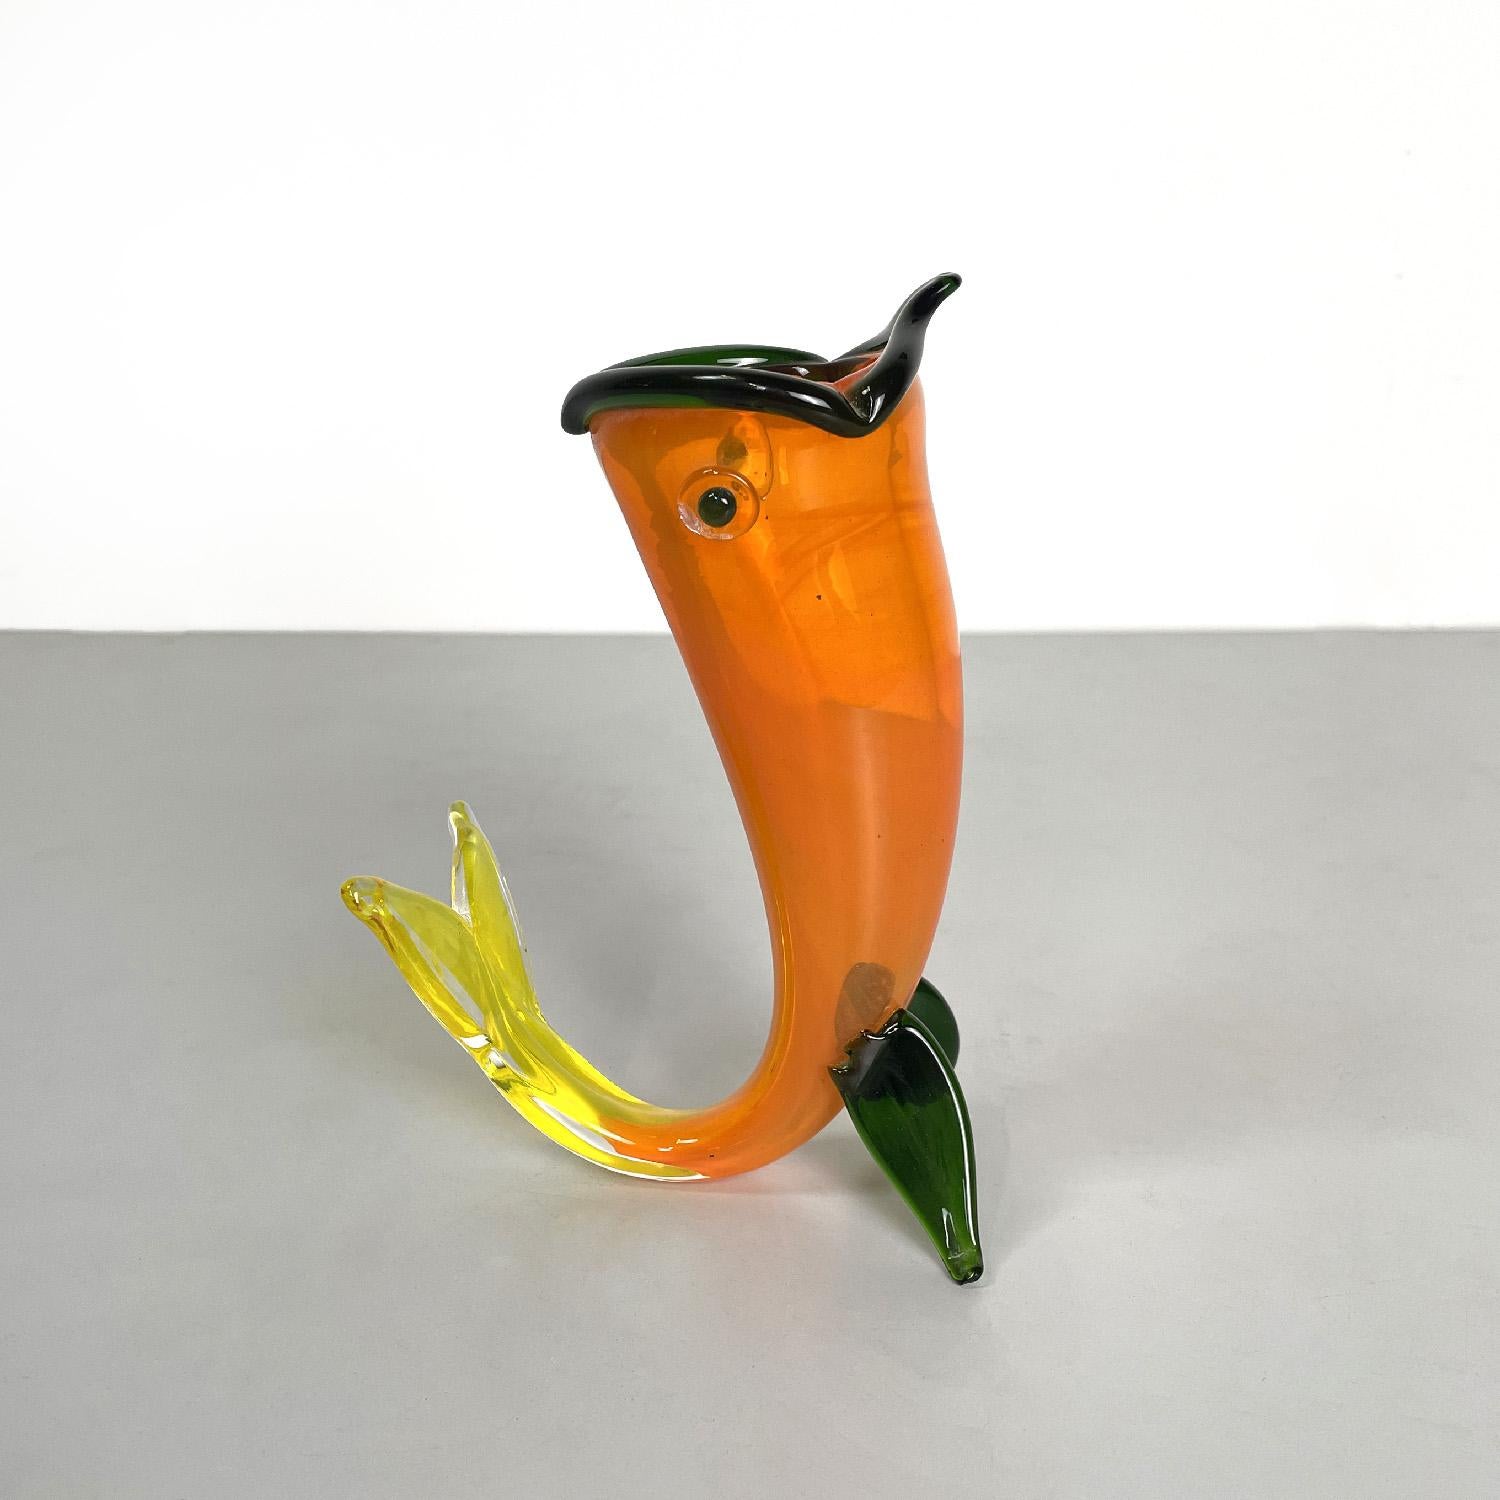 Italian modern Murano orange yellow and green fish vase by Venini, 1990s
Venini fish-shaped vase in Murano glass. The vase rests on the fins and tail of the fish, in the upper part it has a hole that represents the open mouth. The colors of the